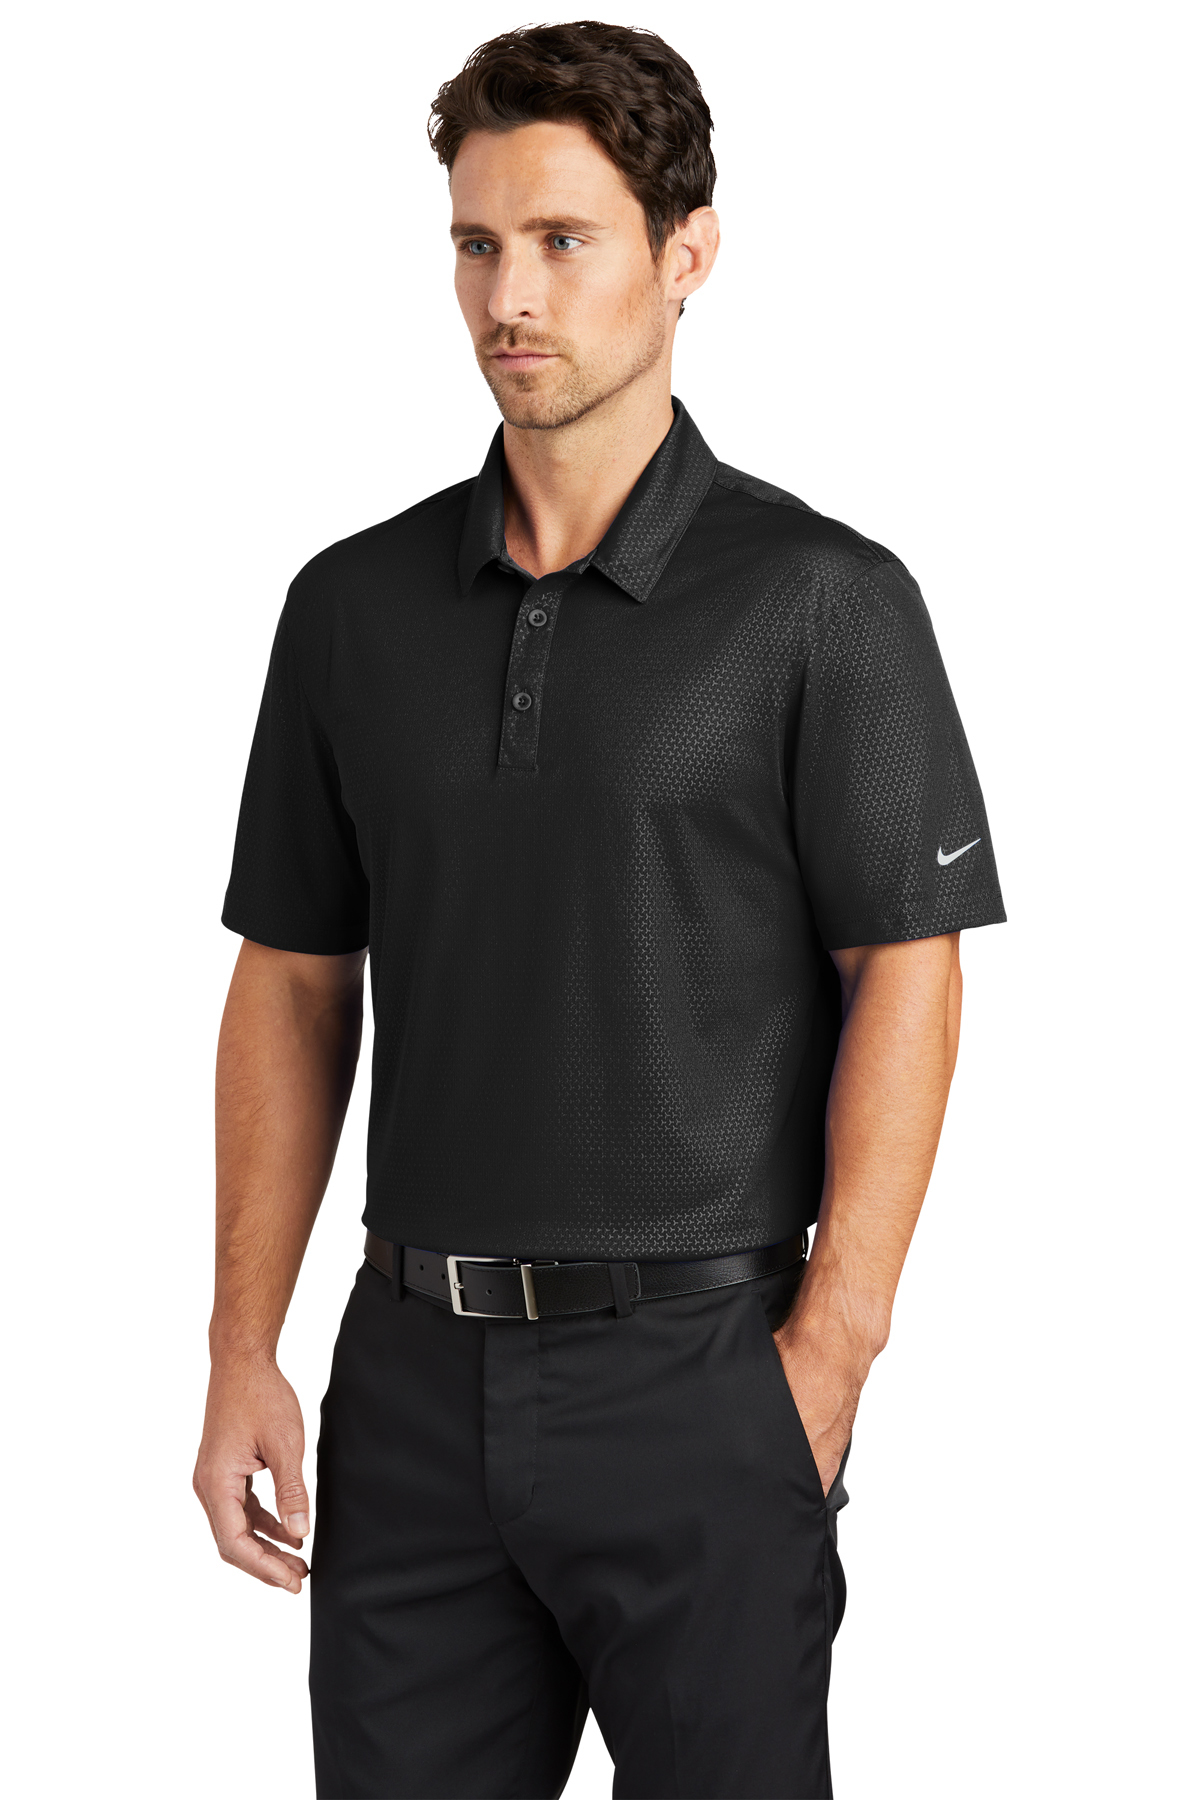 Nike Dri-FIT Embossed Tri-Blade Polo | Product | Company Casuals